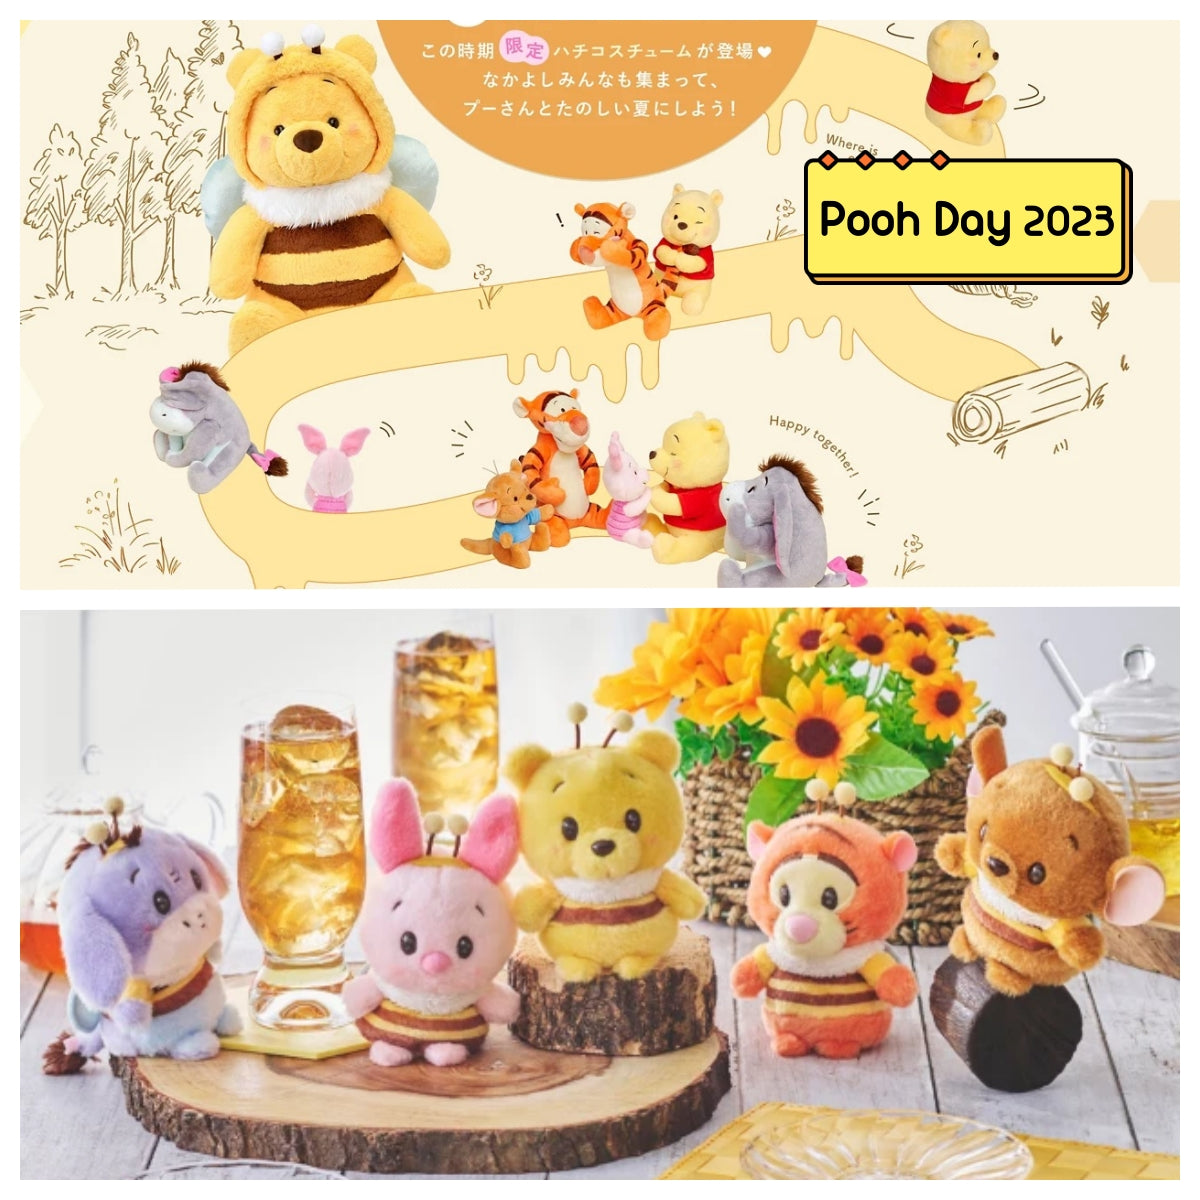 Pooh Day 2023